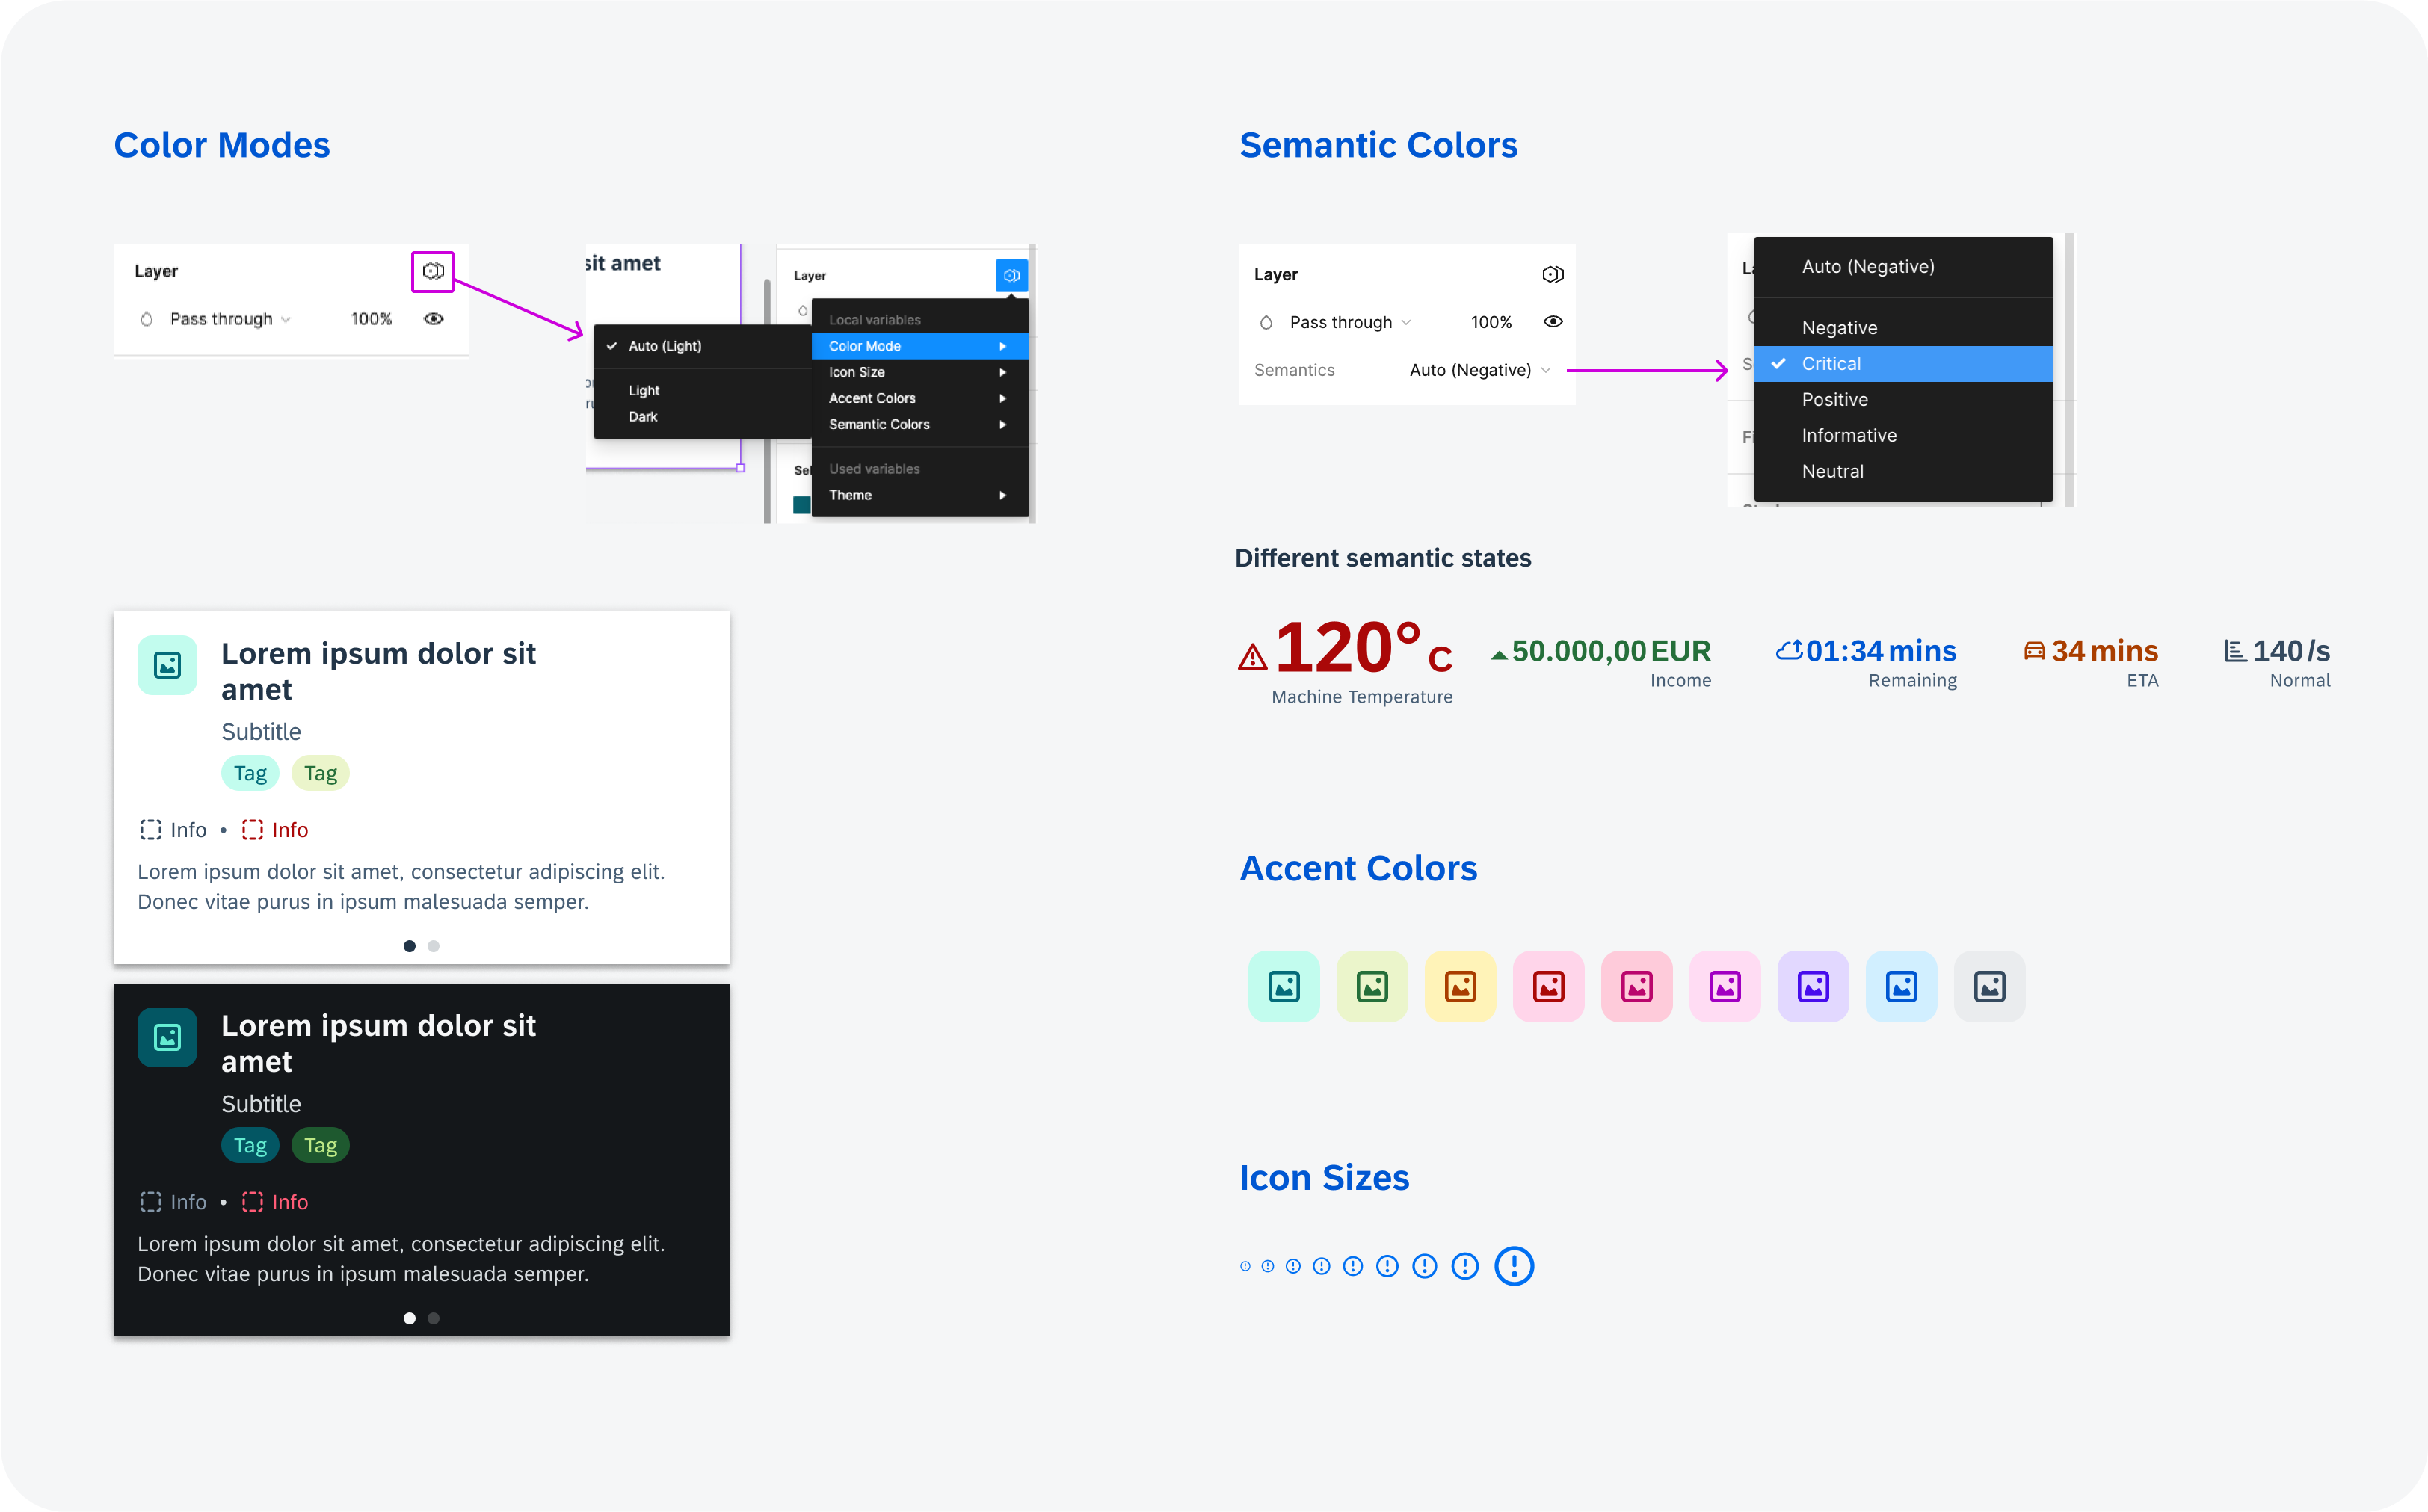 Using variables for switching color modes, Semantic Colors, Accent Colors and icon sizes